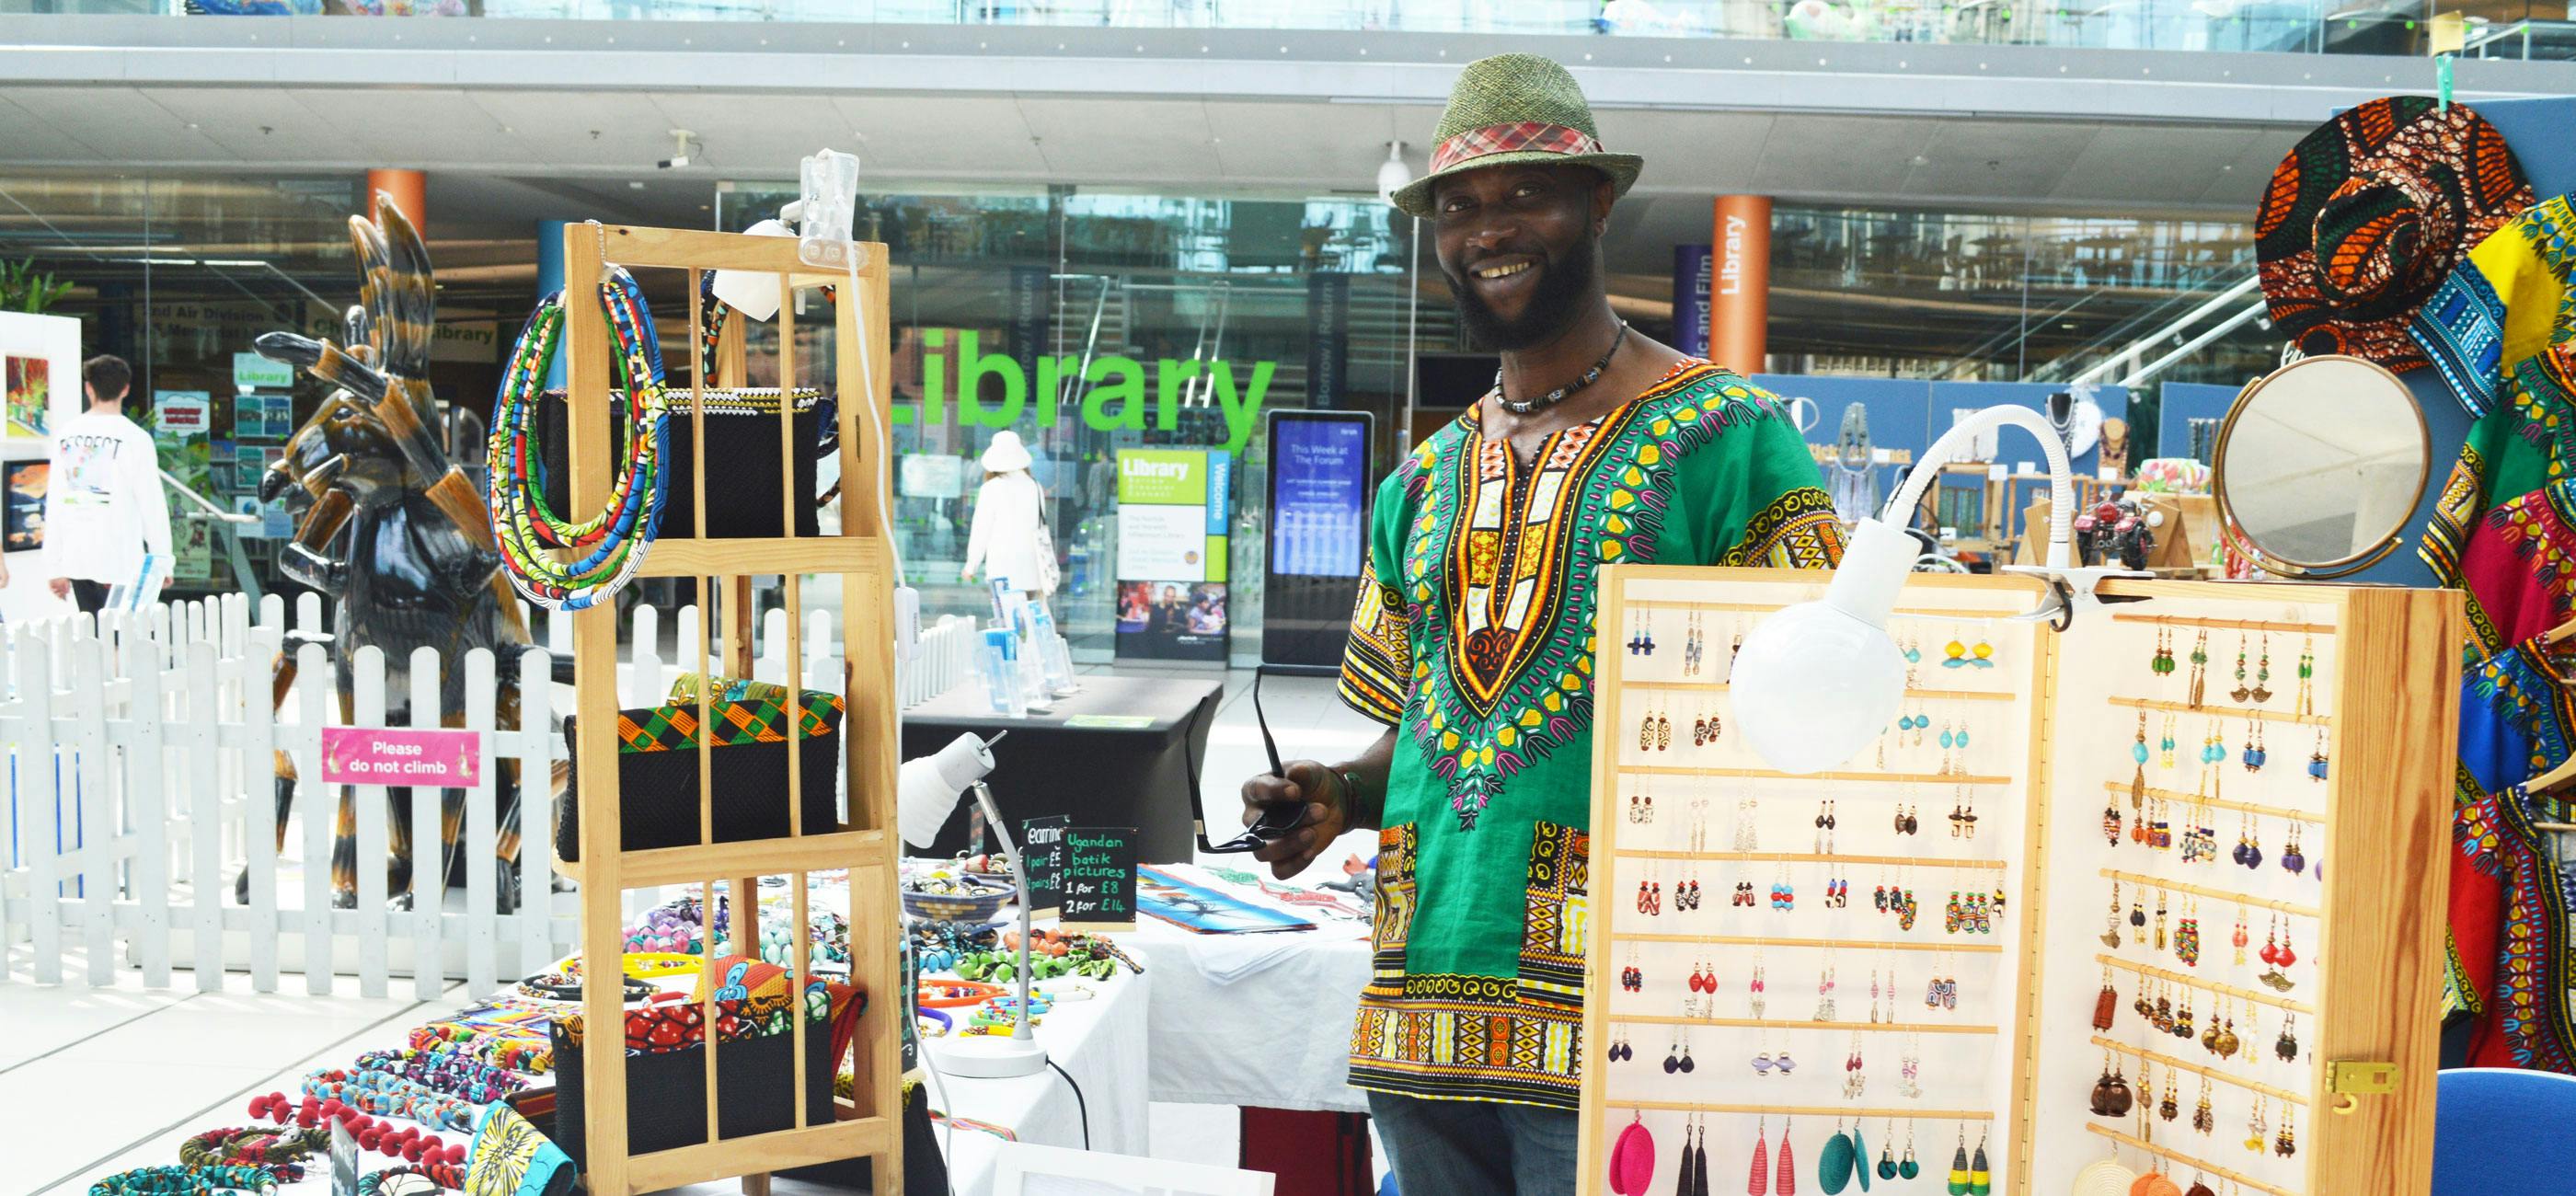 A trader at a craft market stands smiling at his stand which has colourful, beaded jewellery for sale.